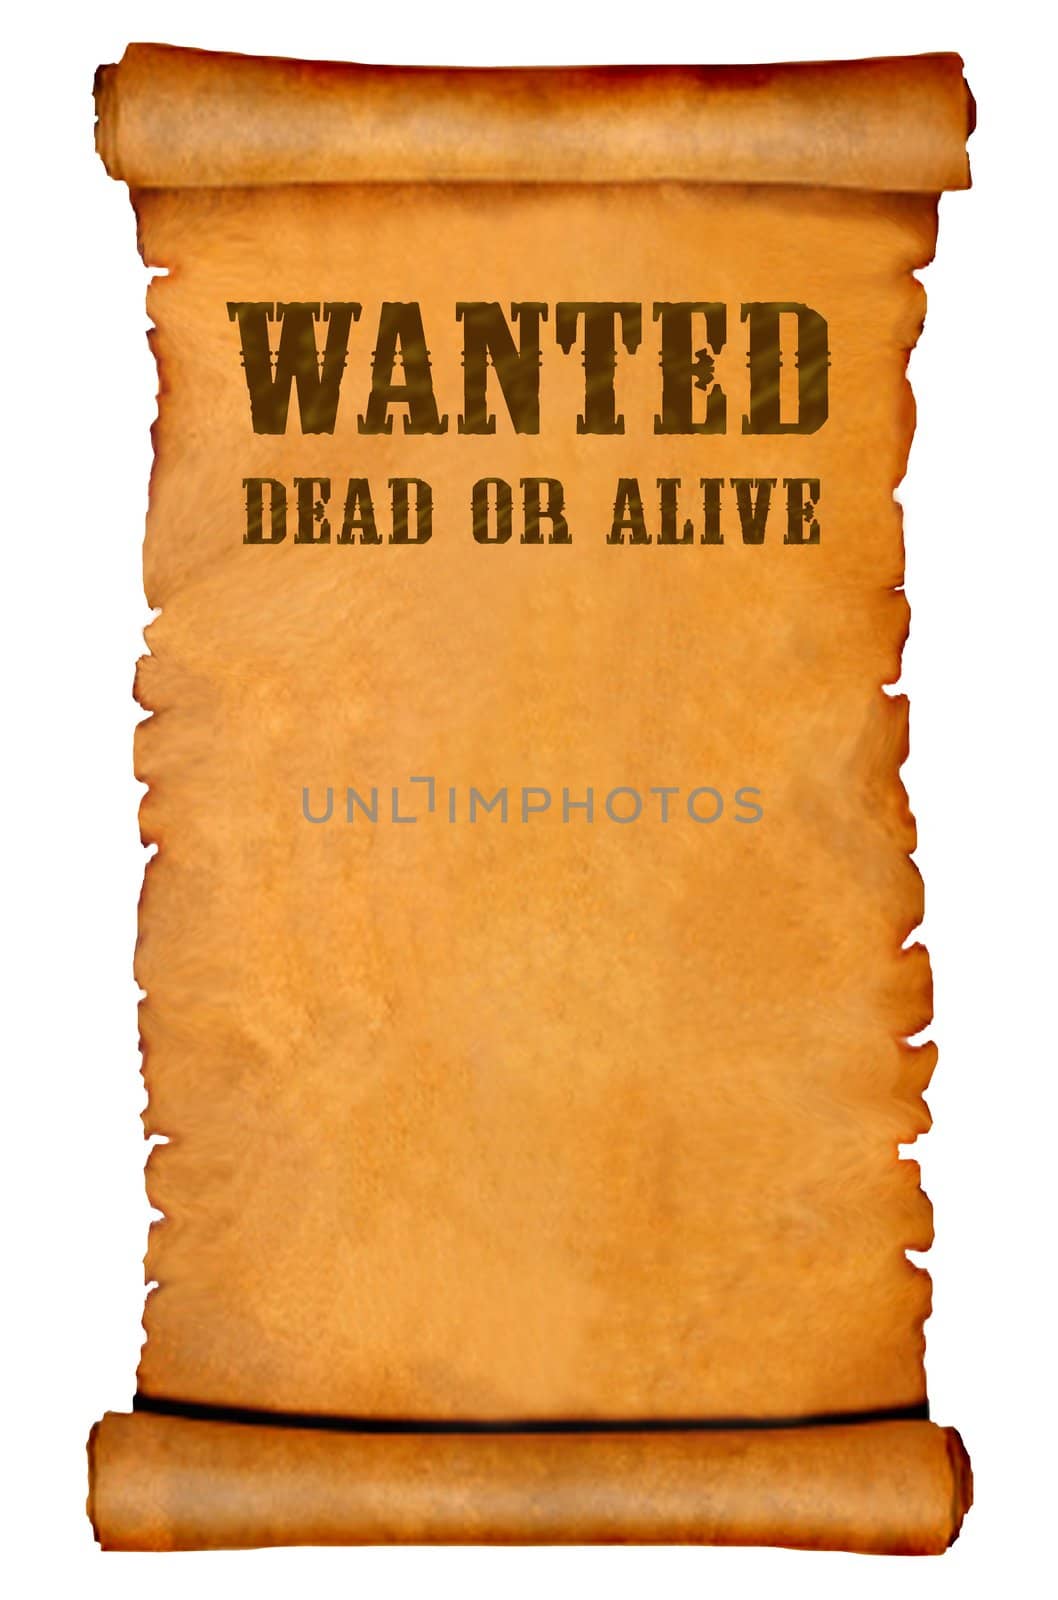 Wanted poster on an ancient parchment by acremead